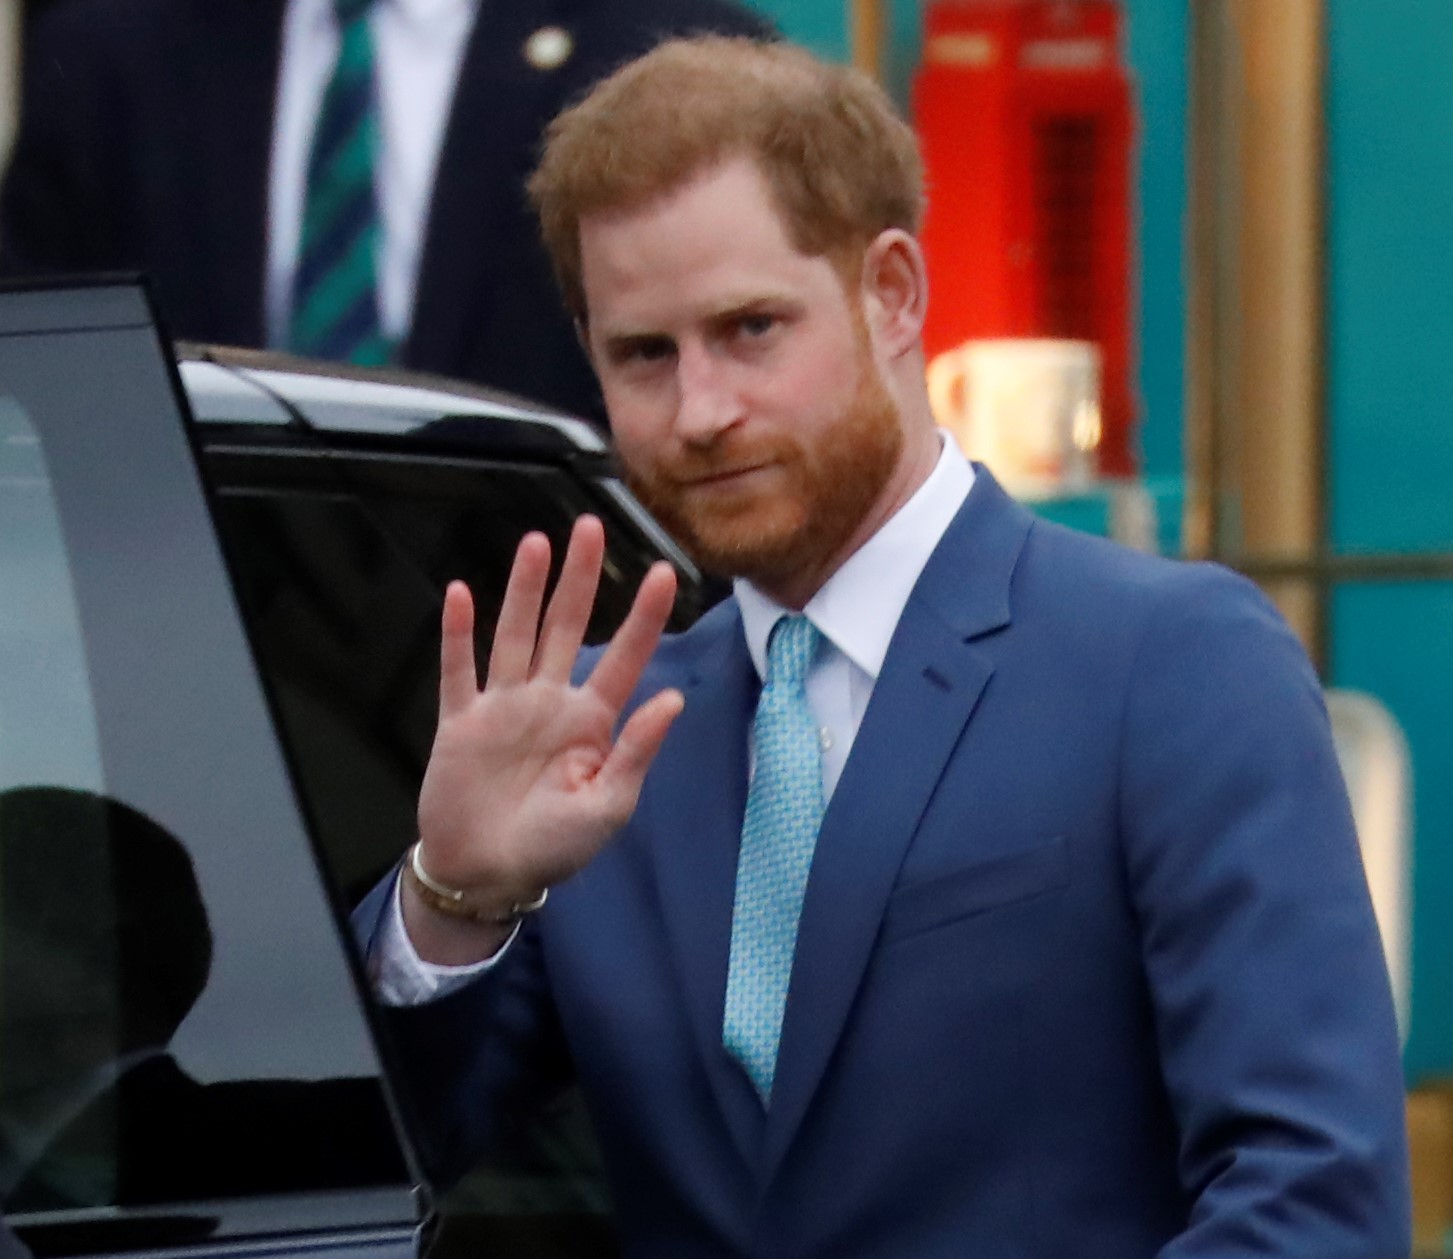 Prince Harry waving goodbye as he leaves the annual Commonwealth Service at Westminster Abbey